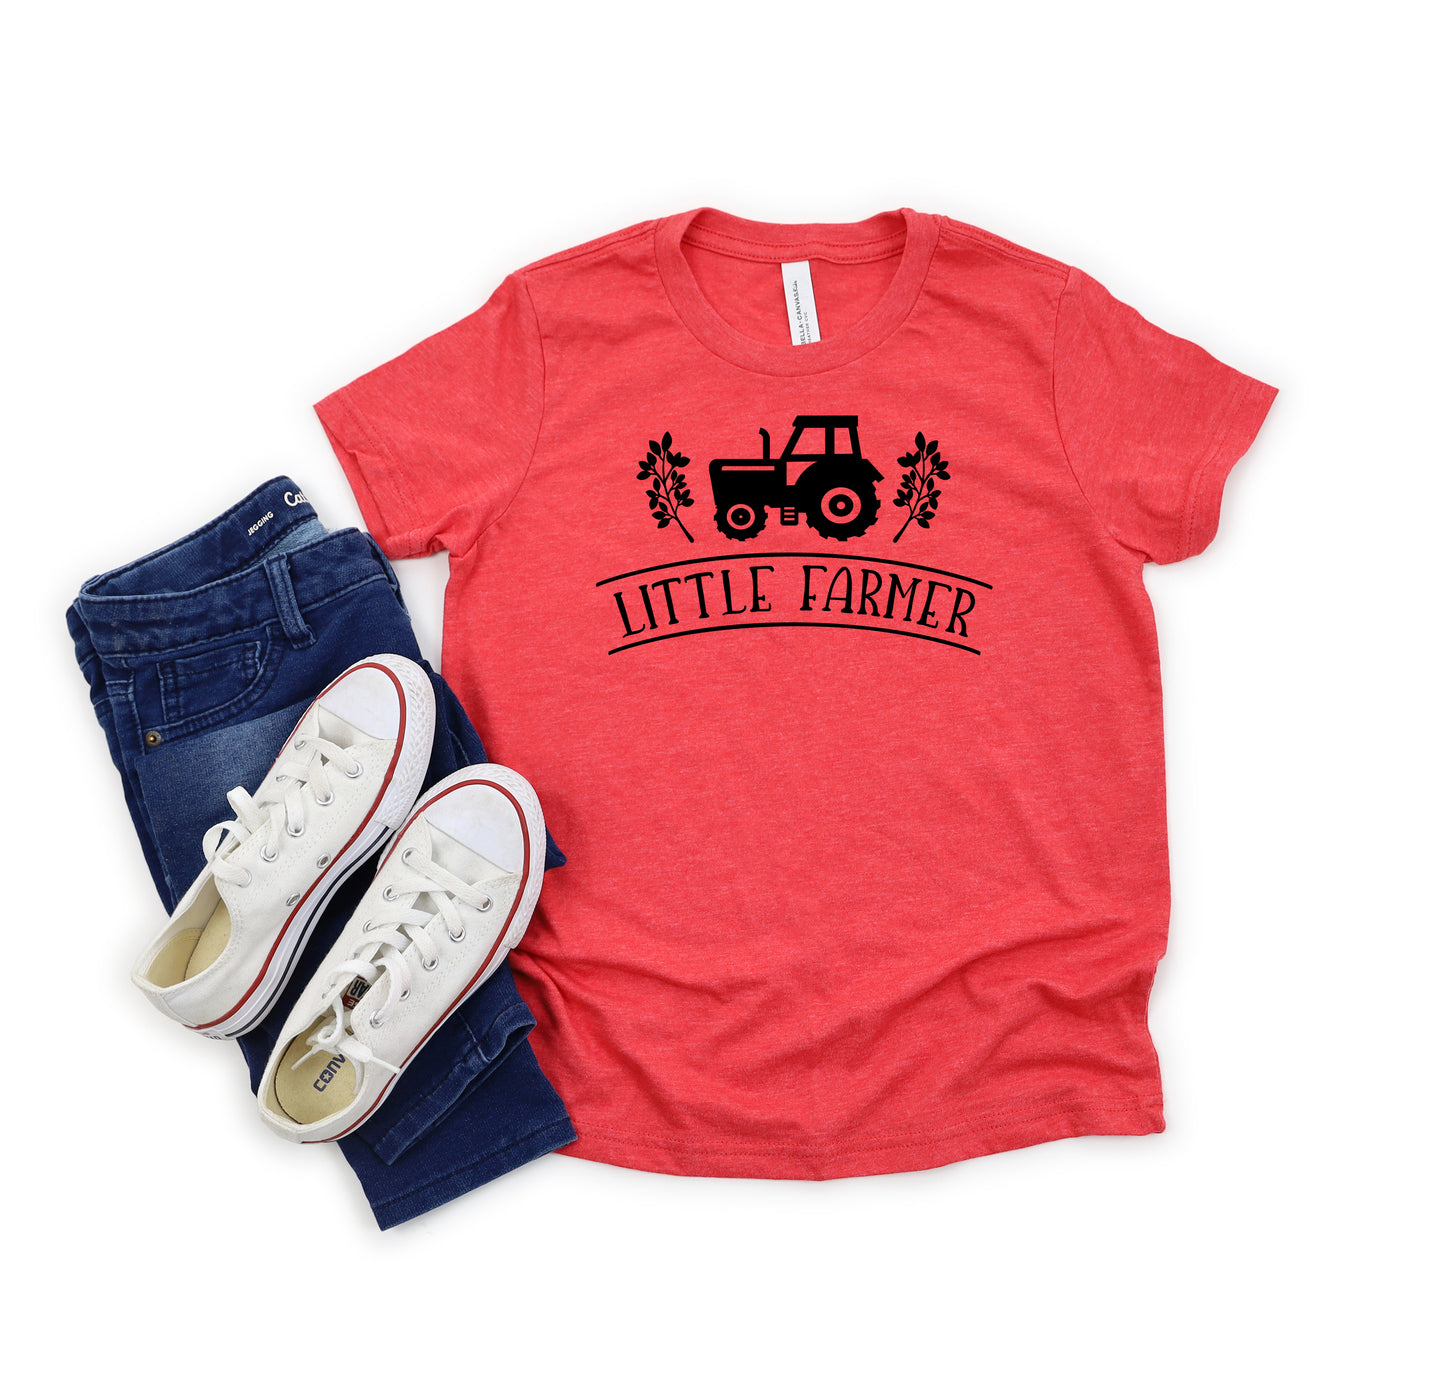 Little Farmer Tractor | Youth Short Sleeve Crew Neck